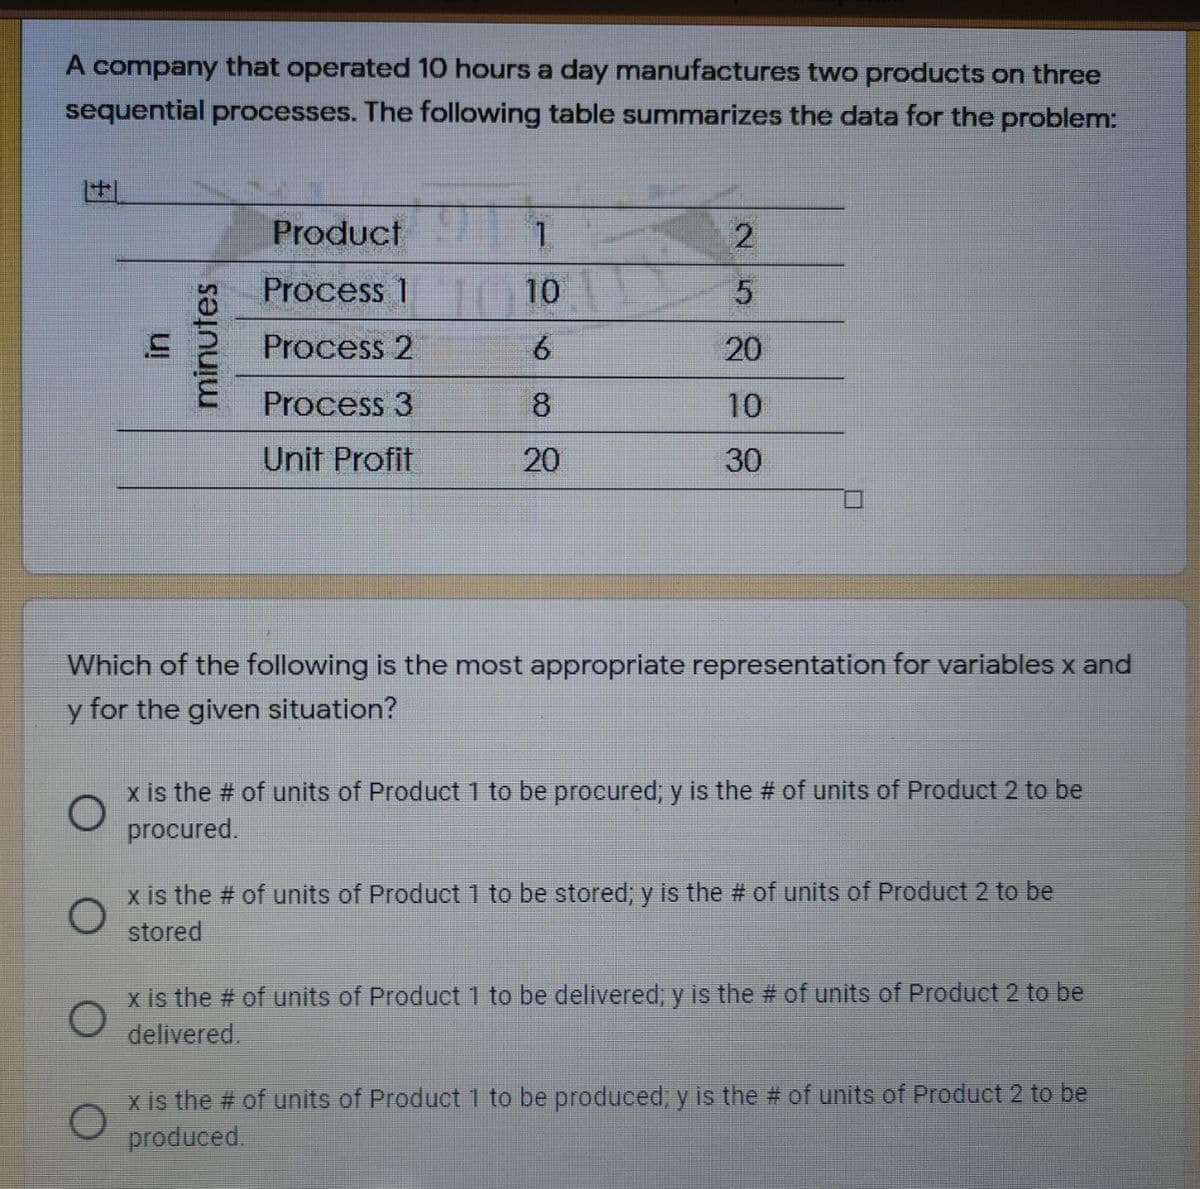 A company that operated 10 hours a day manufactures two products on three
sequential processes. The following table summarizes the data for the problem:
Product
Process 1
10
Process 2
20
Process 3
8
10
Unit Profit
20
30
Which of the following is the most appropriate representation for variables x and
y for the given situation?
x is the # of units of Product 1 to be procured; y is the # of units of Product 2 to be
procured.
x is the # of units of Product 1 to be stored; y is the # of units of Product 2 to be
stored
x is the # of units of Product 1 to be delivered, y is the # of units of Product 2 to be
delivered.
x is the # of units of Product 1 to be produced; y is the # of units of Product 2 to be
produced.
minutes
